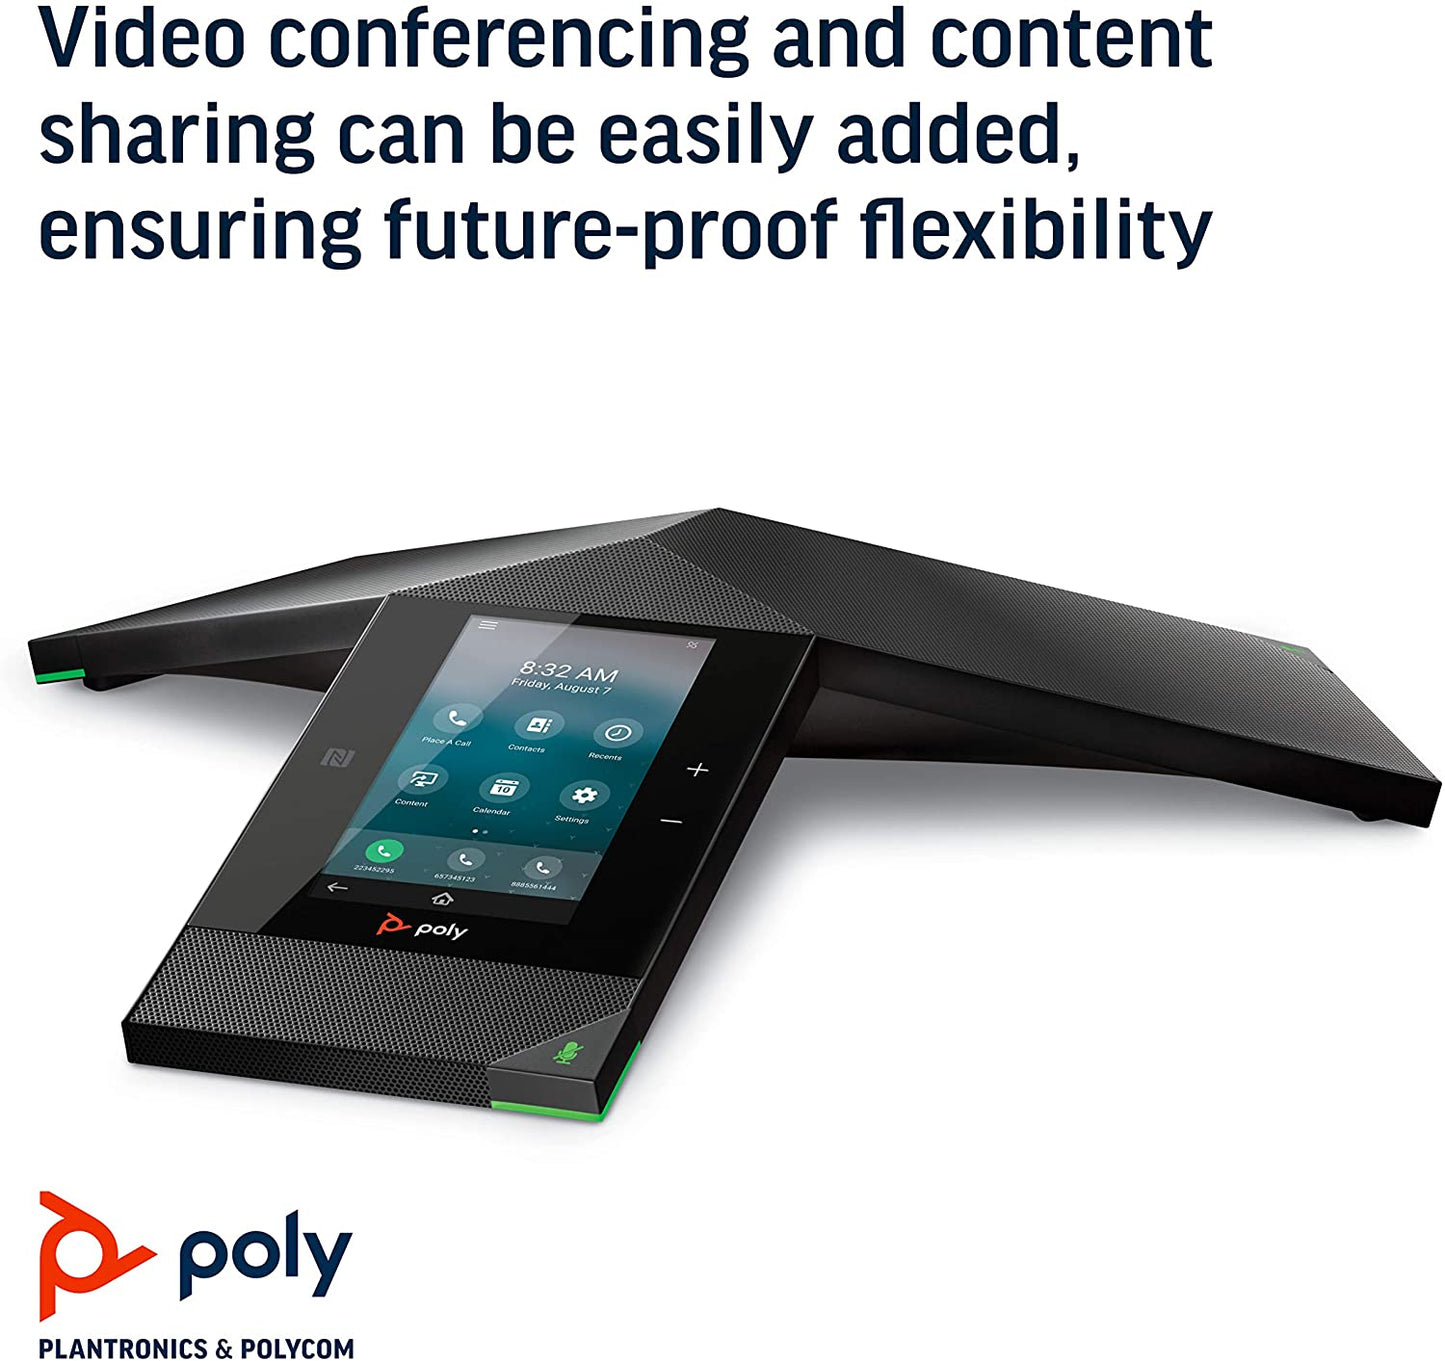 Poly Trio 8800 Smart Conference Phone